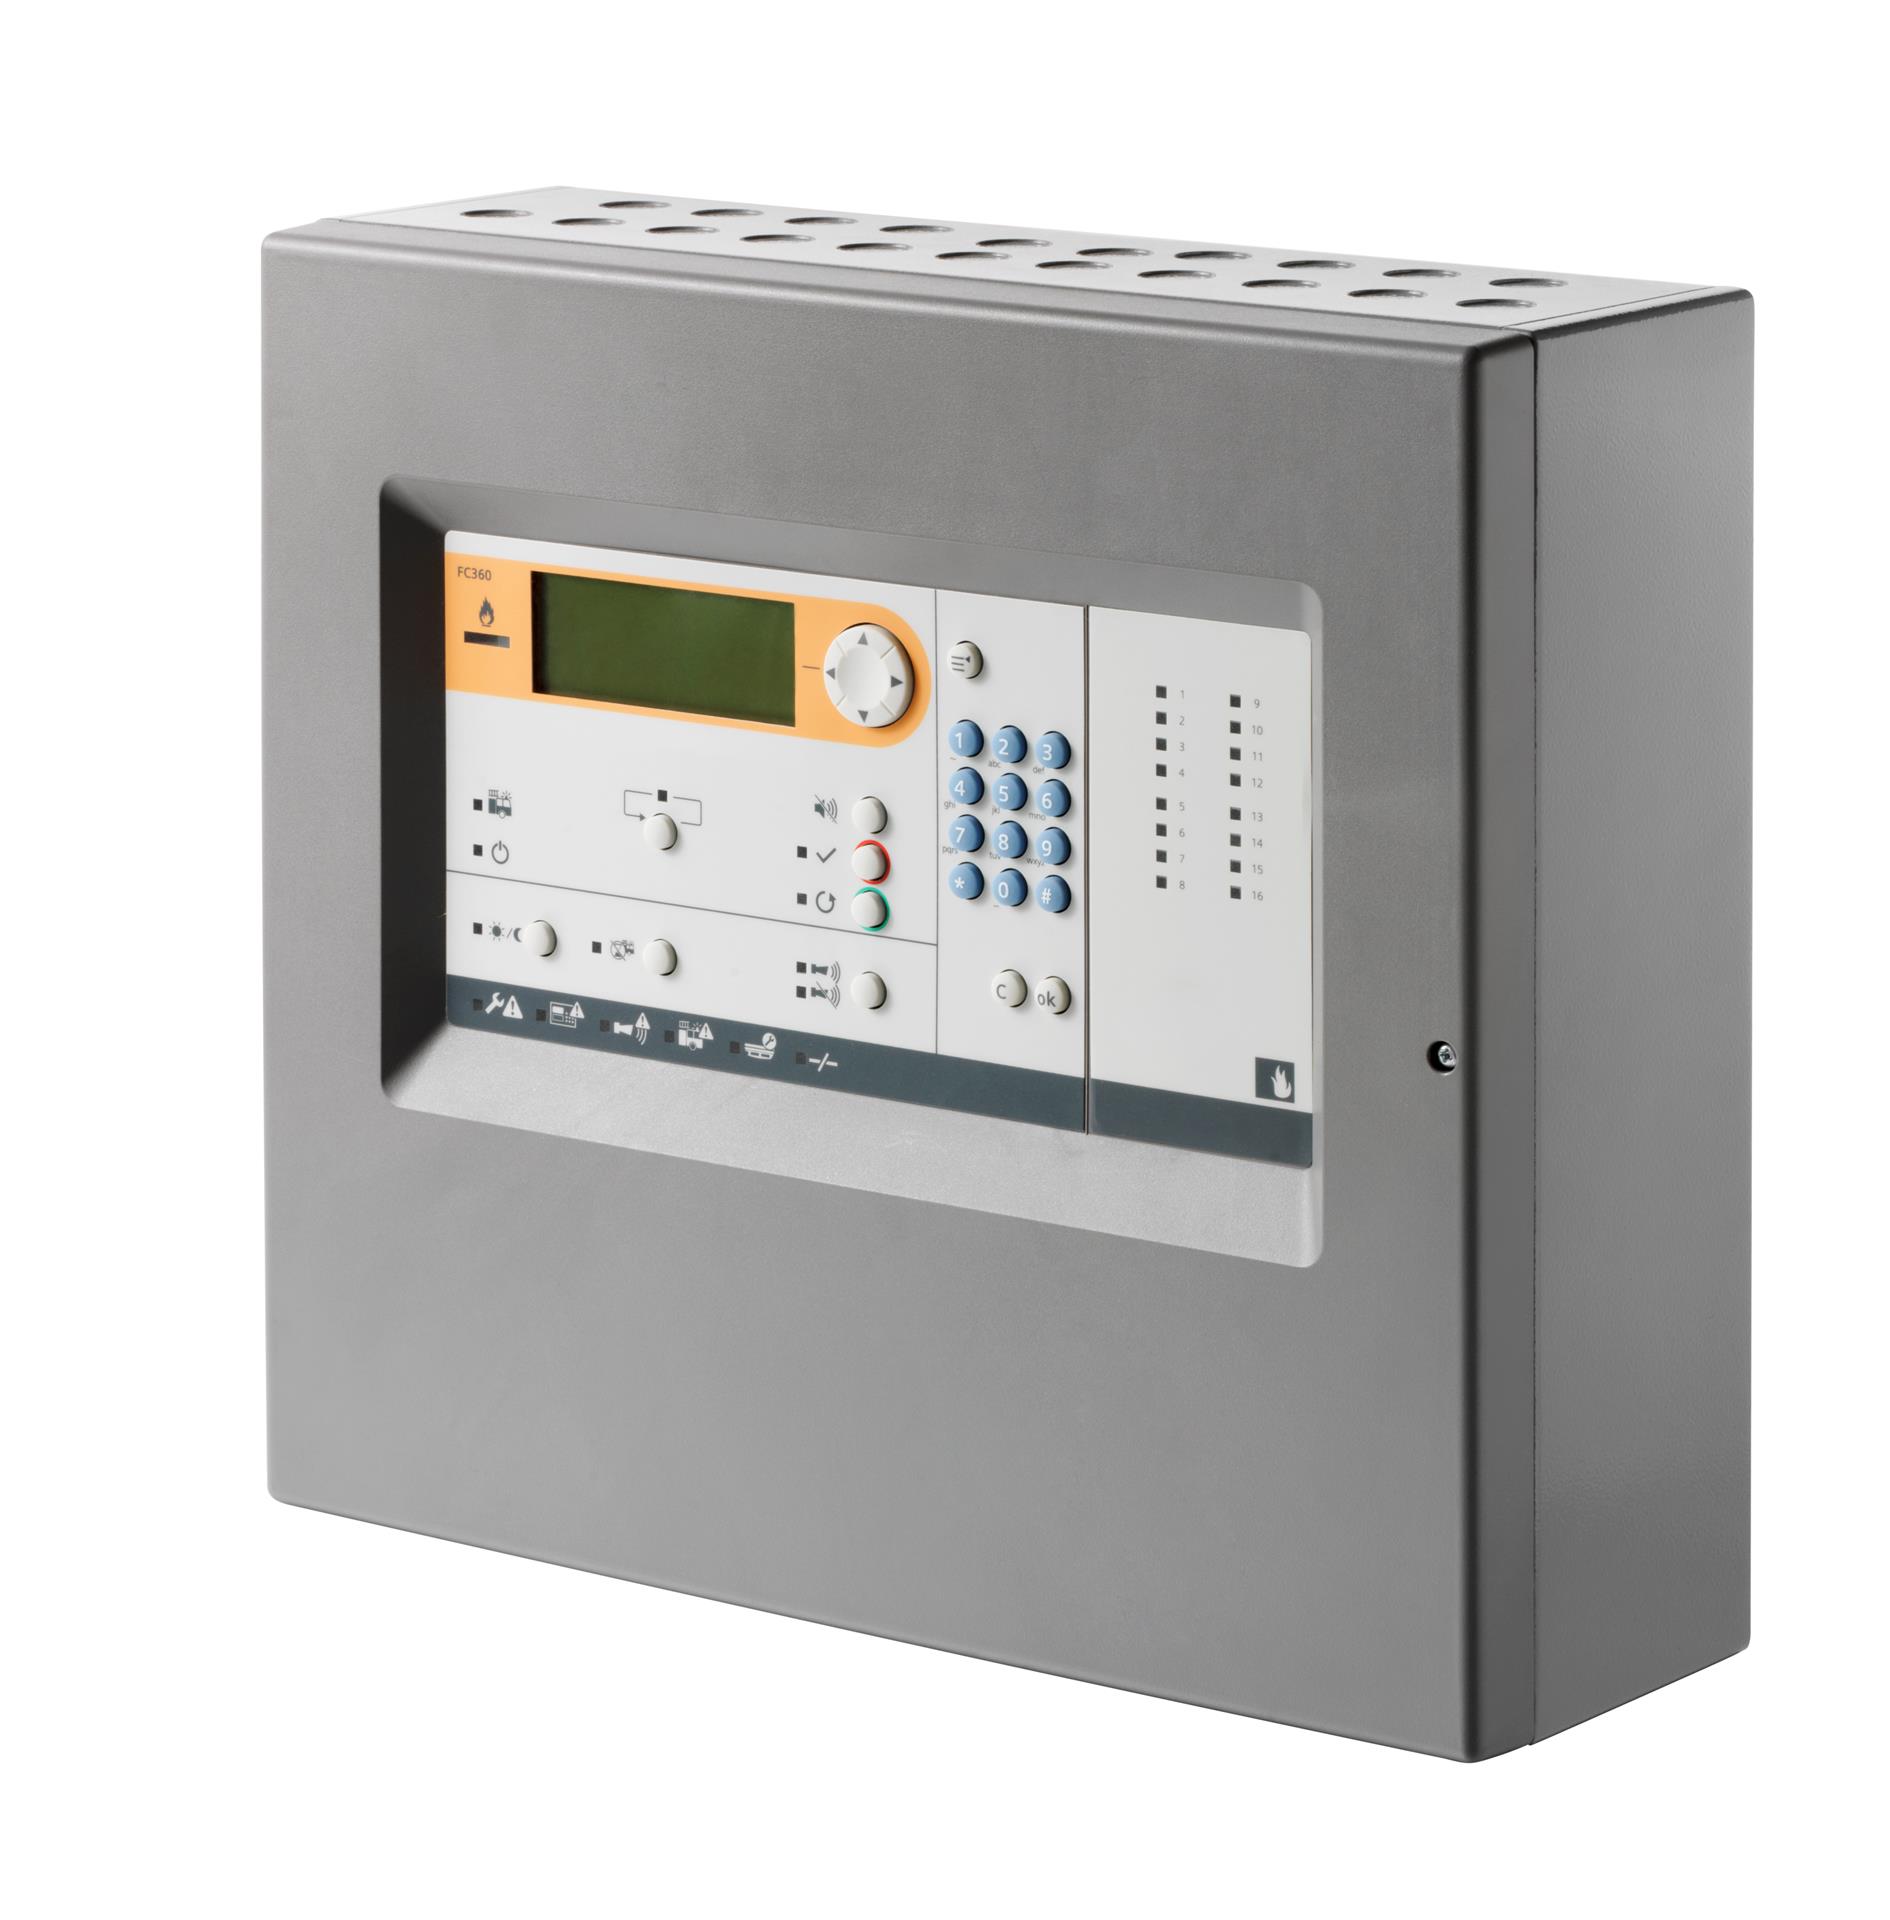 SIEMENS FC361-YA Cerberus FIT Interactive Fire Detection and Alarm Control Panel – Comfort Case and LED Indicator (1 loop, 126 addresses)